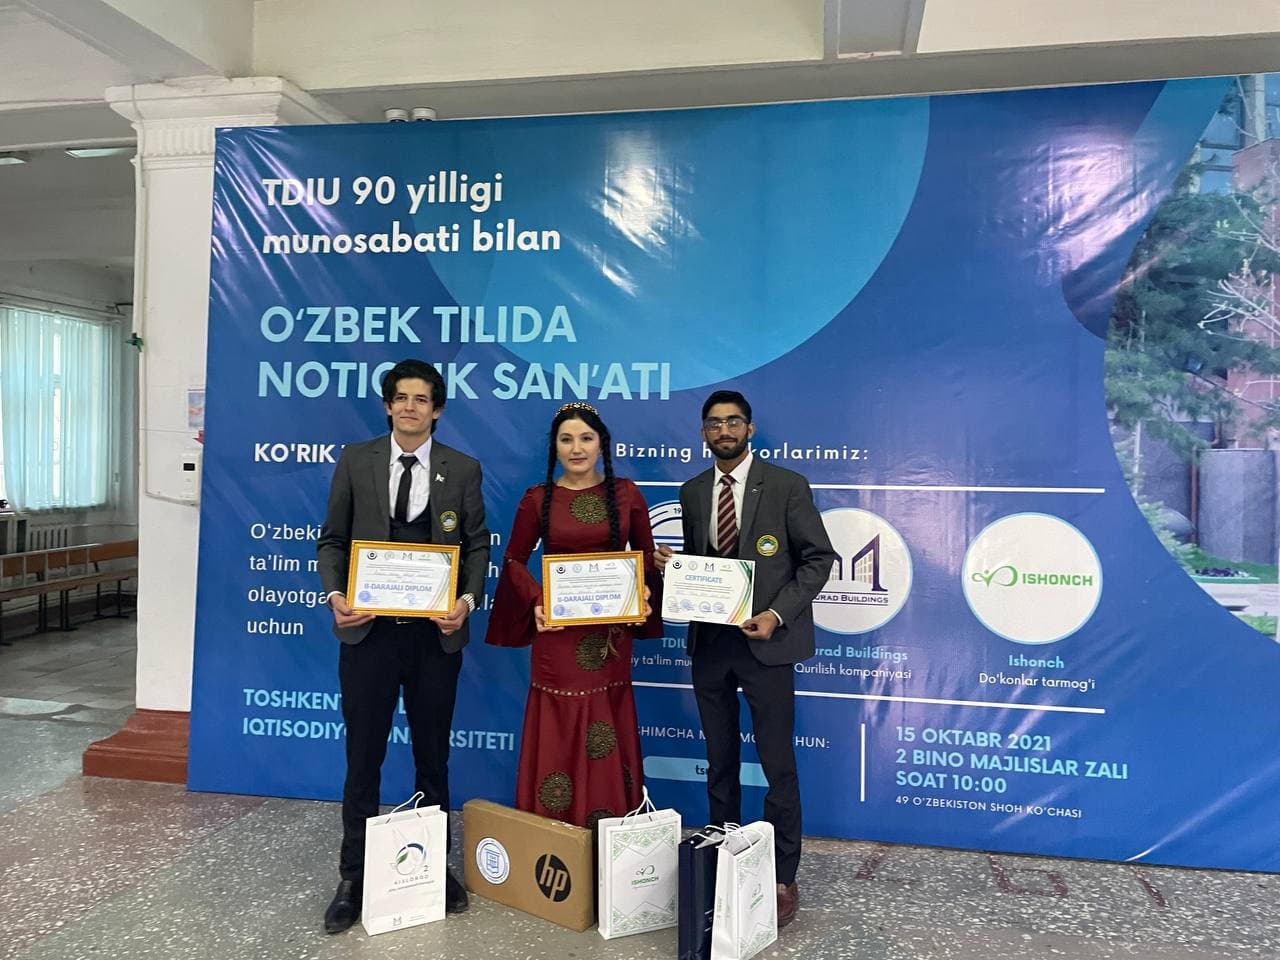 AHMED KADEER TOOK THE 2ND PLACE IN THE REPUBLICAN CONTEST “THE ART OF SPEECH IN UZBEK LANGUAGE”